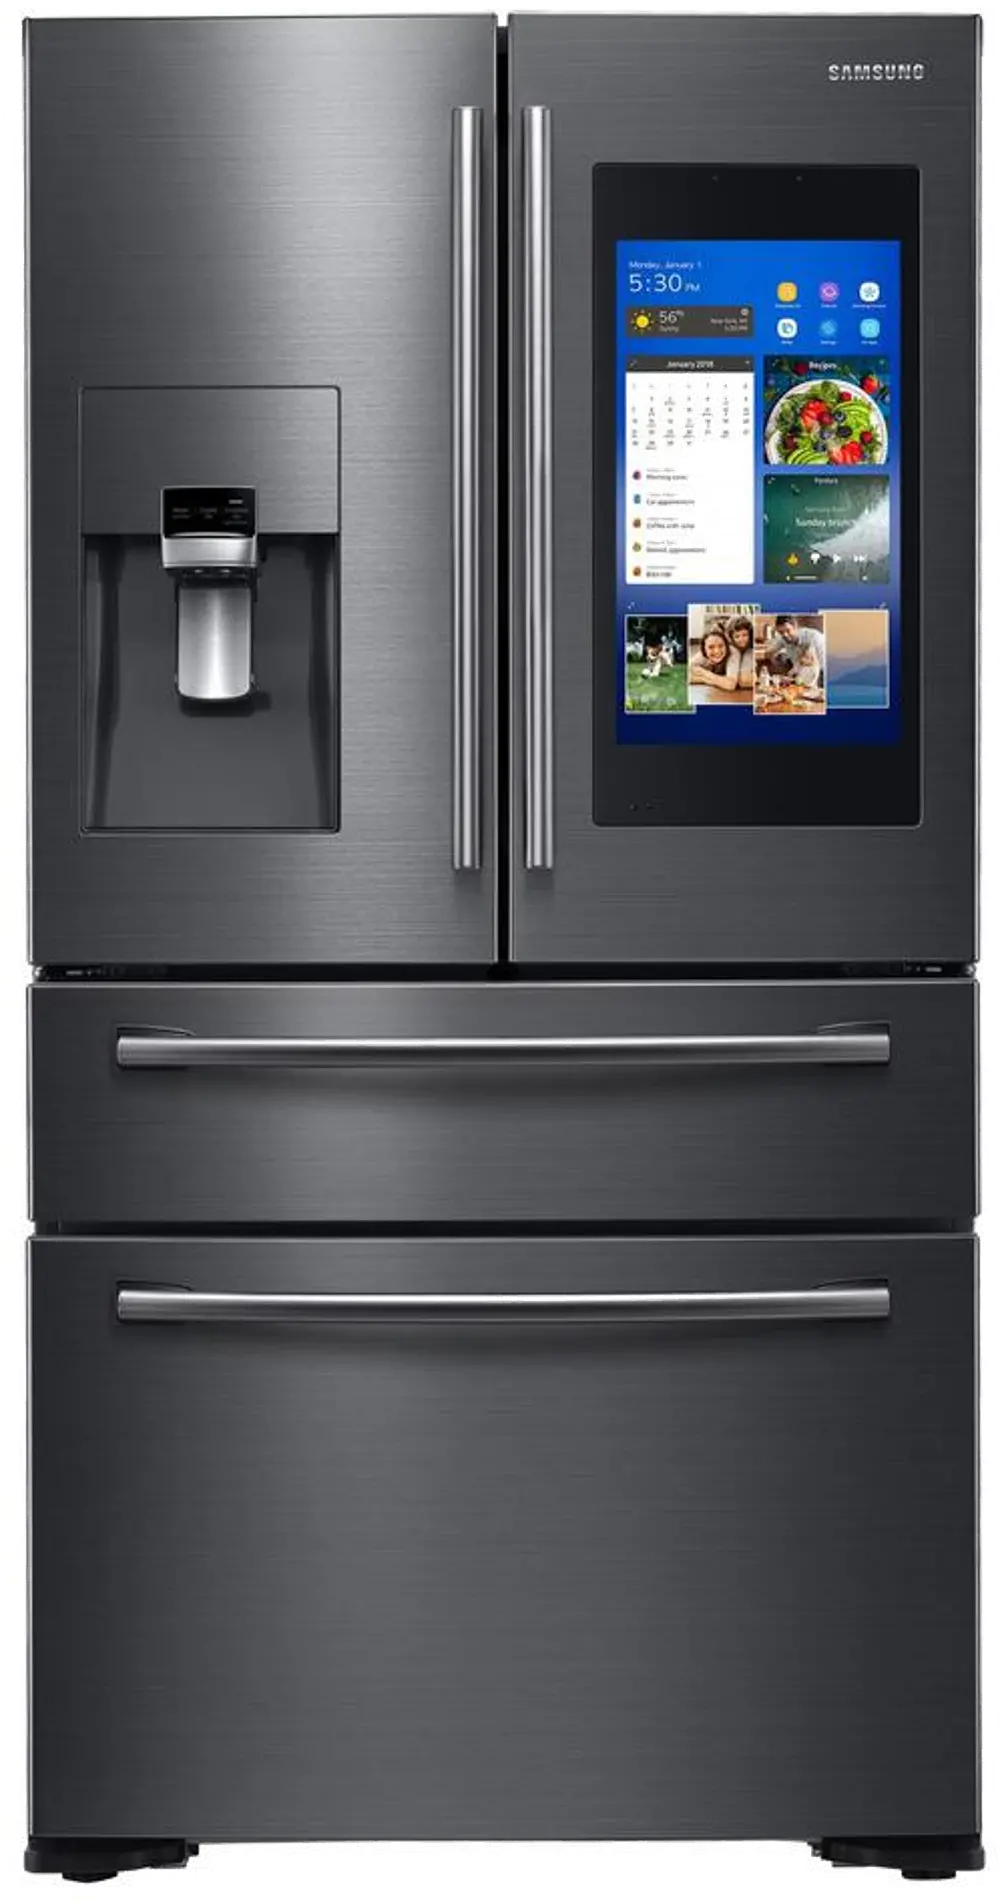 RF22NPEDBSG Samsung Counter Depth Family Hub Smart Refrigerator with 4 Doors - 21.9 cu. ft., 36 Inch Black Stainless Steel-1